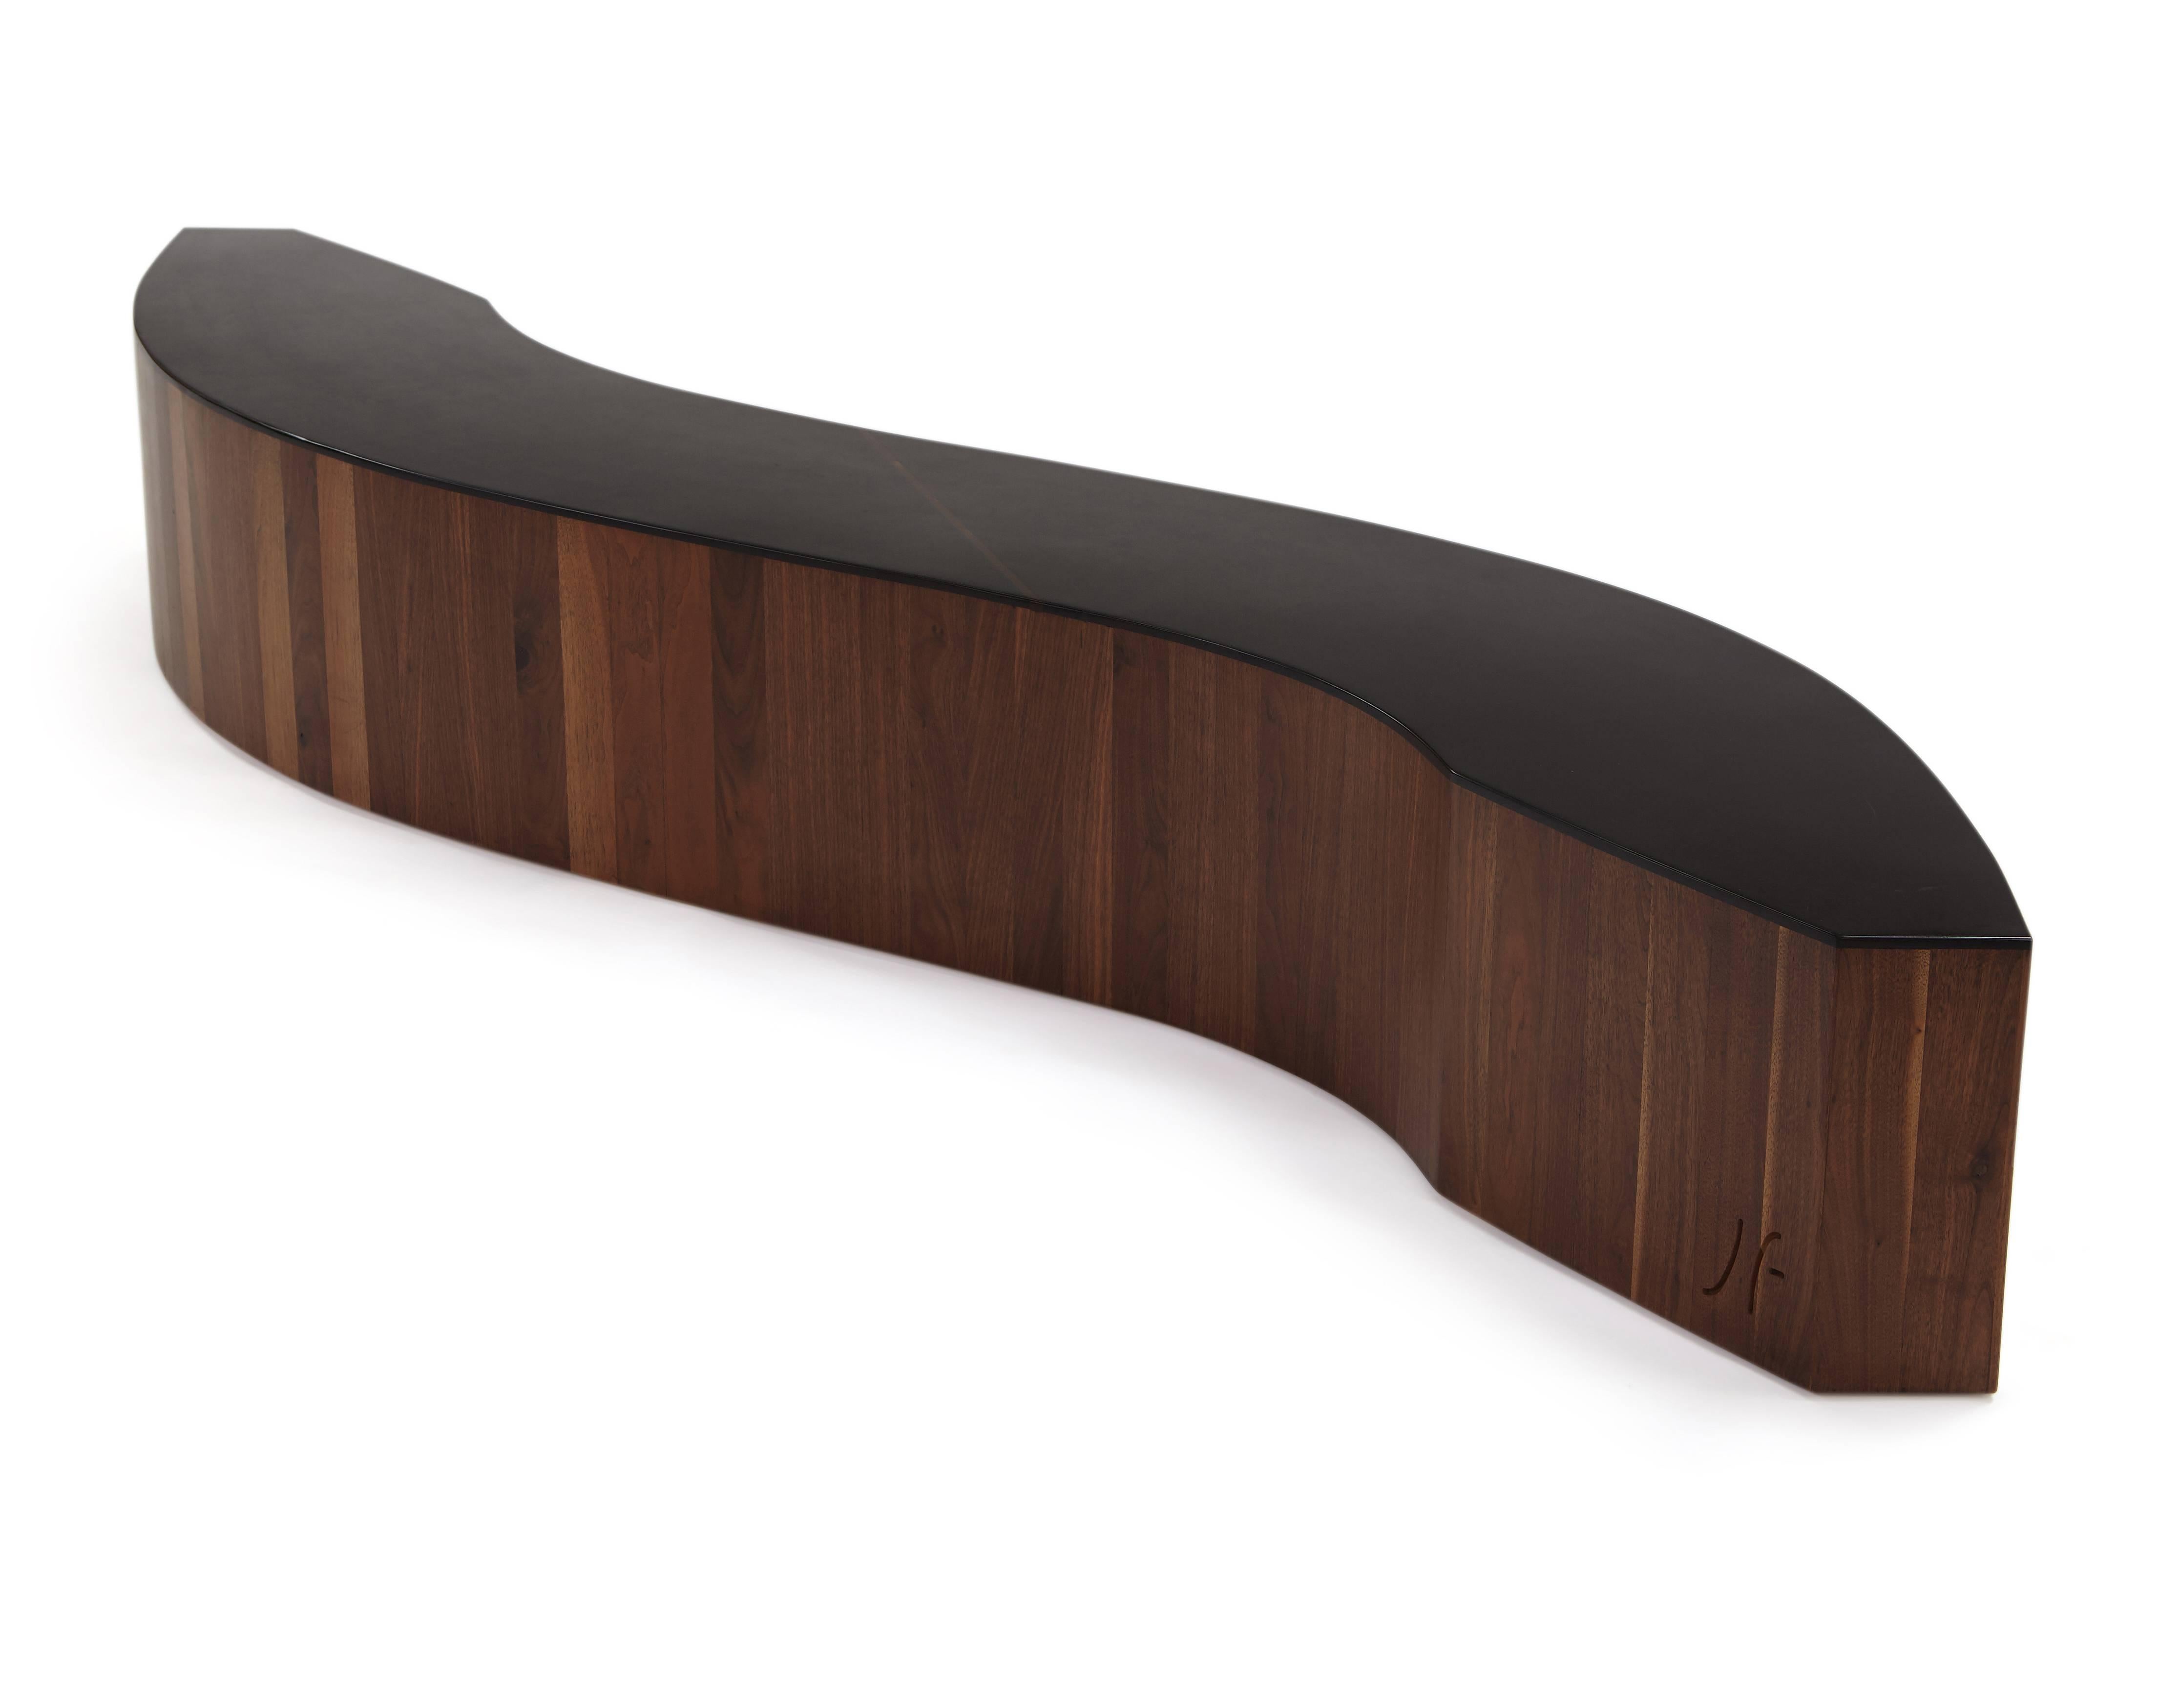 English Gallery Bench in walnut or oak with a corian top. bespoke size by Jonathan Field For Sale